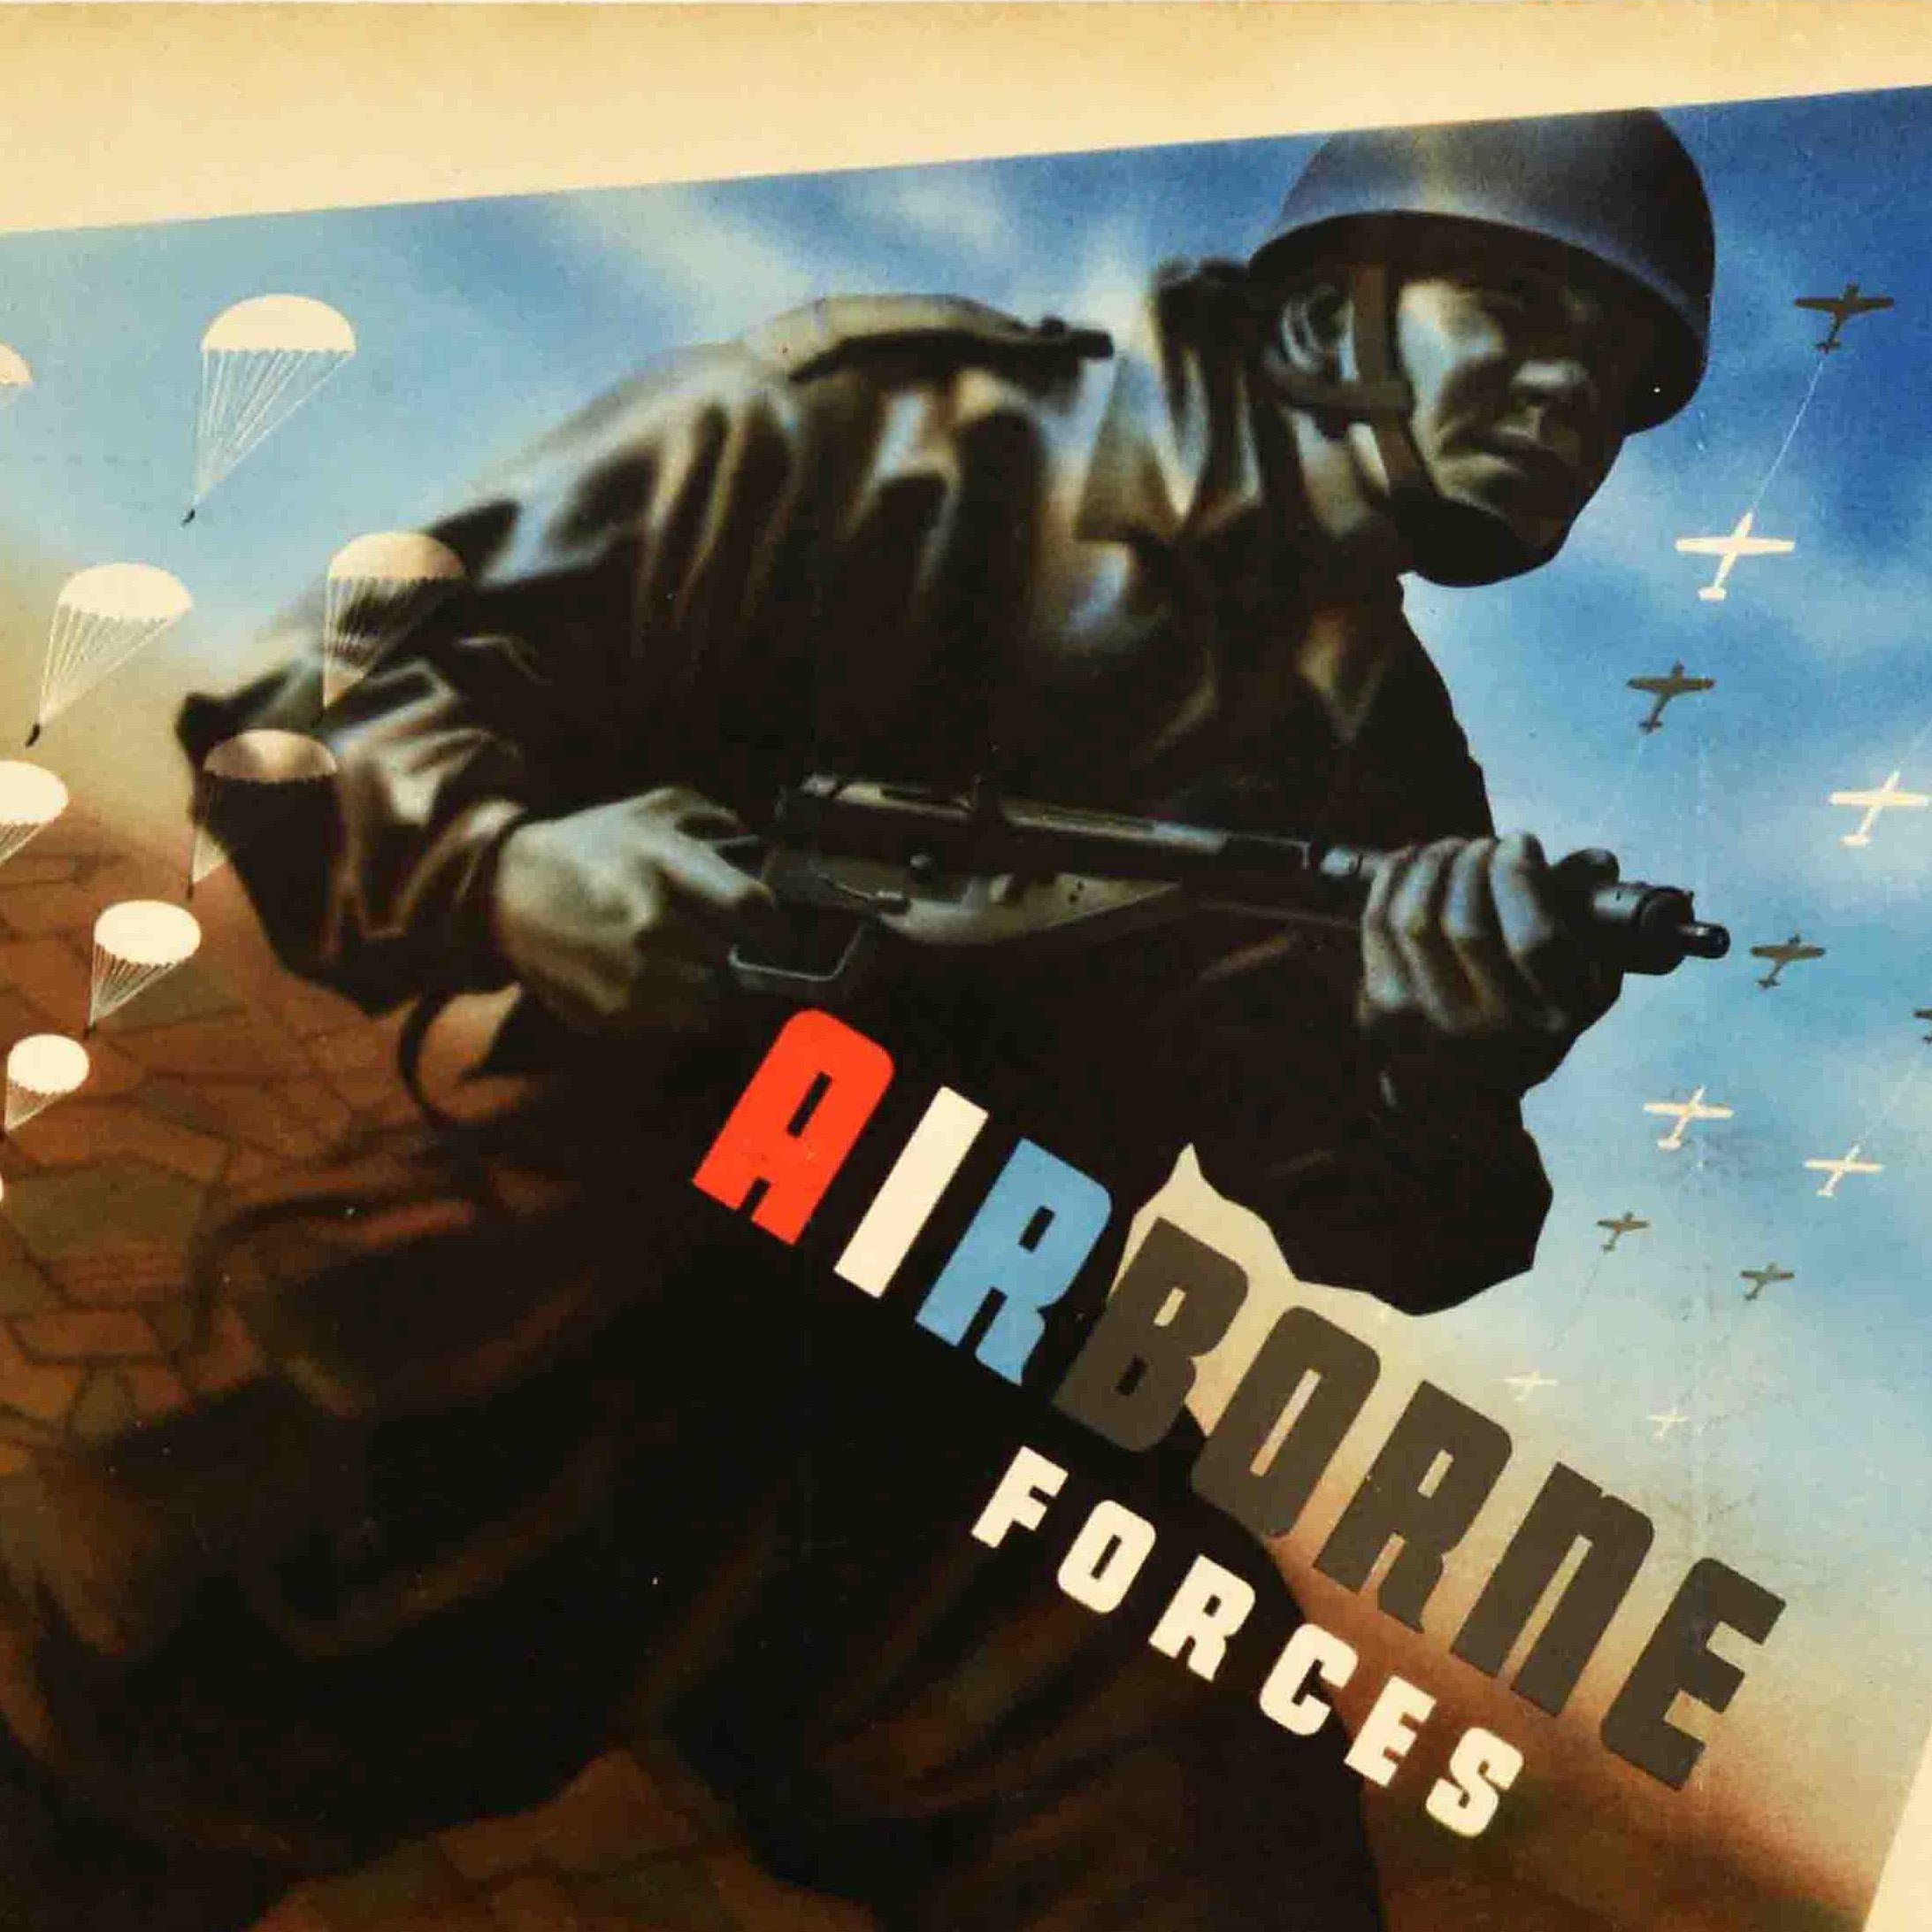 Original vintage World War Two recruitment poster - The Airborne forces of the British Army consist of parachute troops and glider-borne troops of all arms of the service - featuring a modernist design by the notable British graphic designer Abram